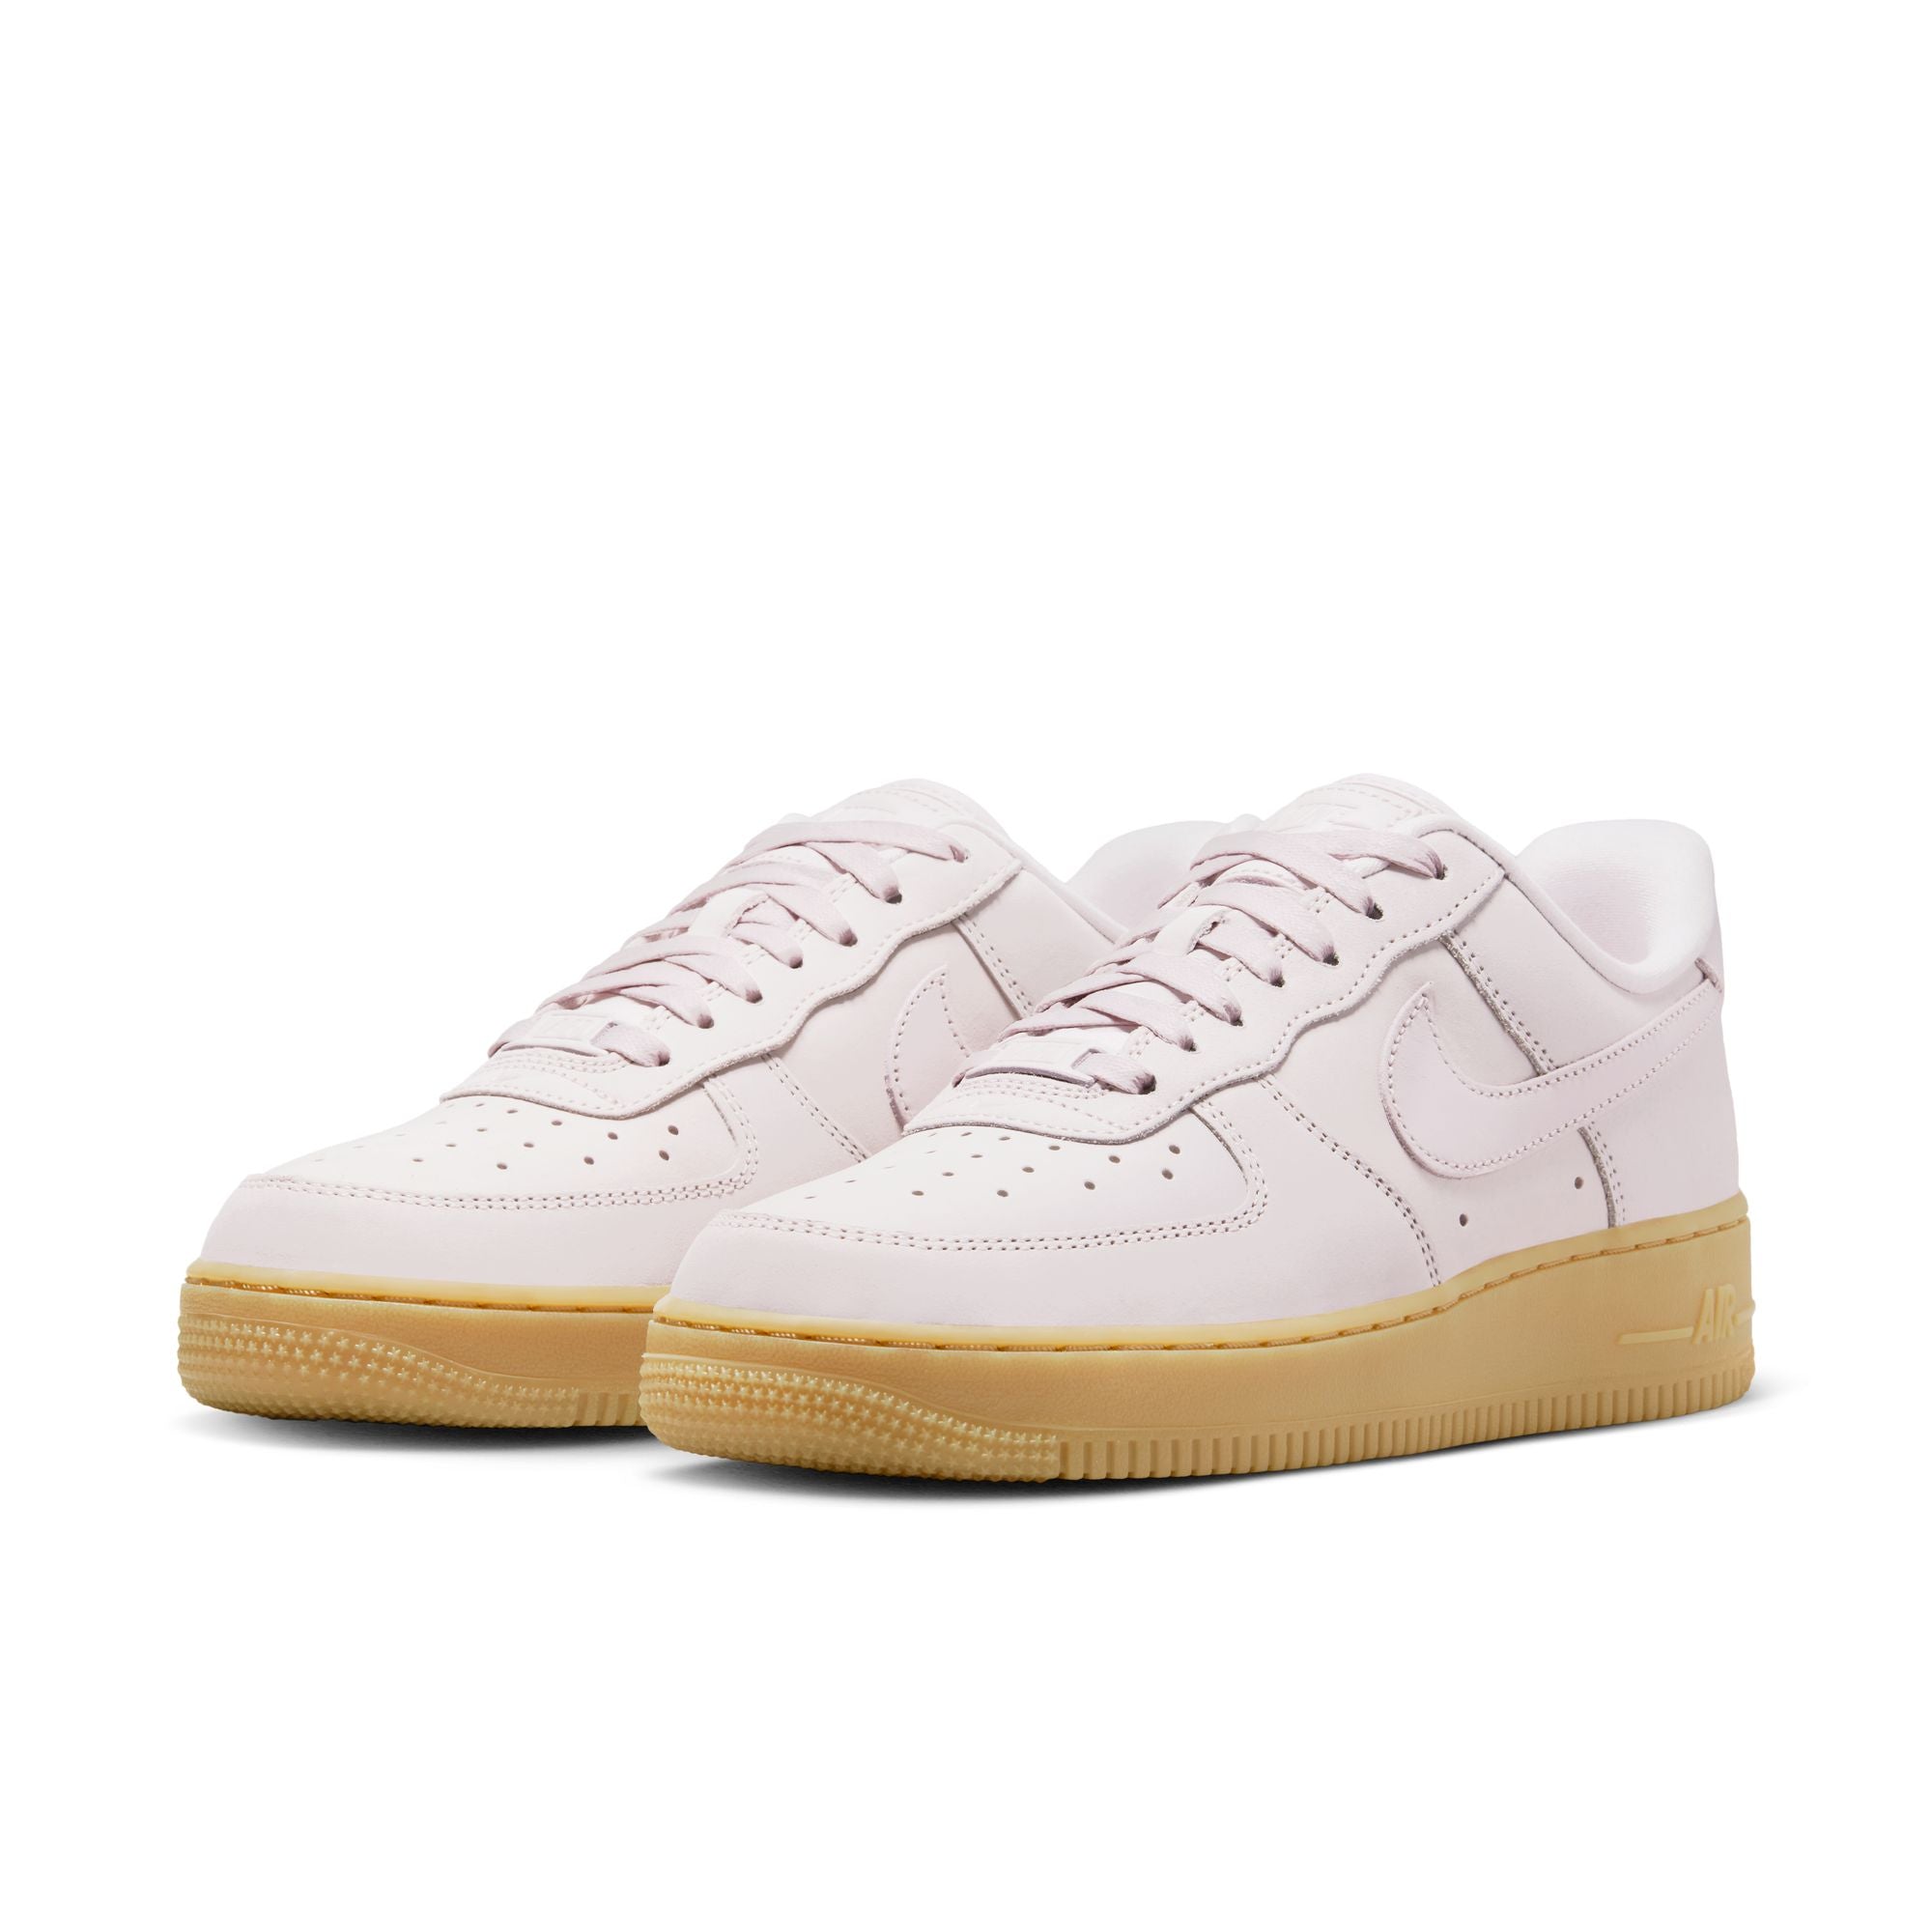 WMNS Air Force 1 PRM MF – Laced.